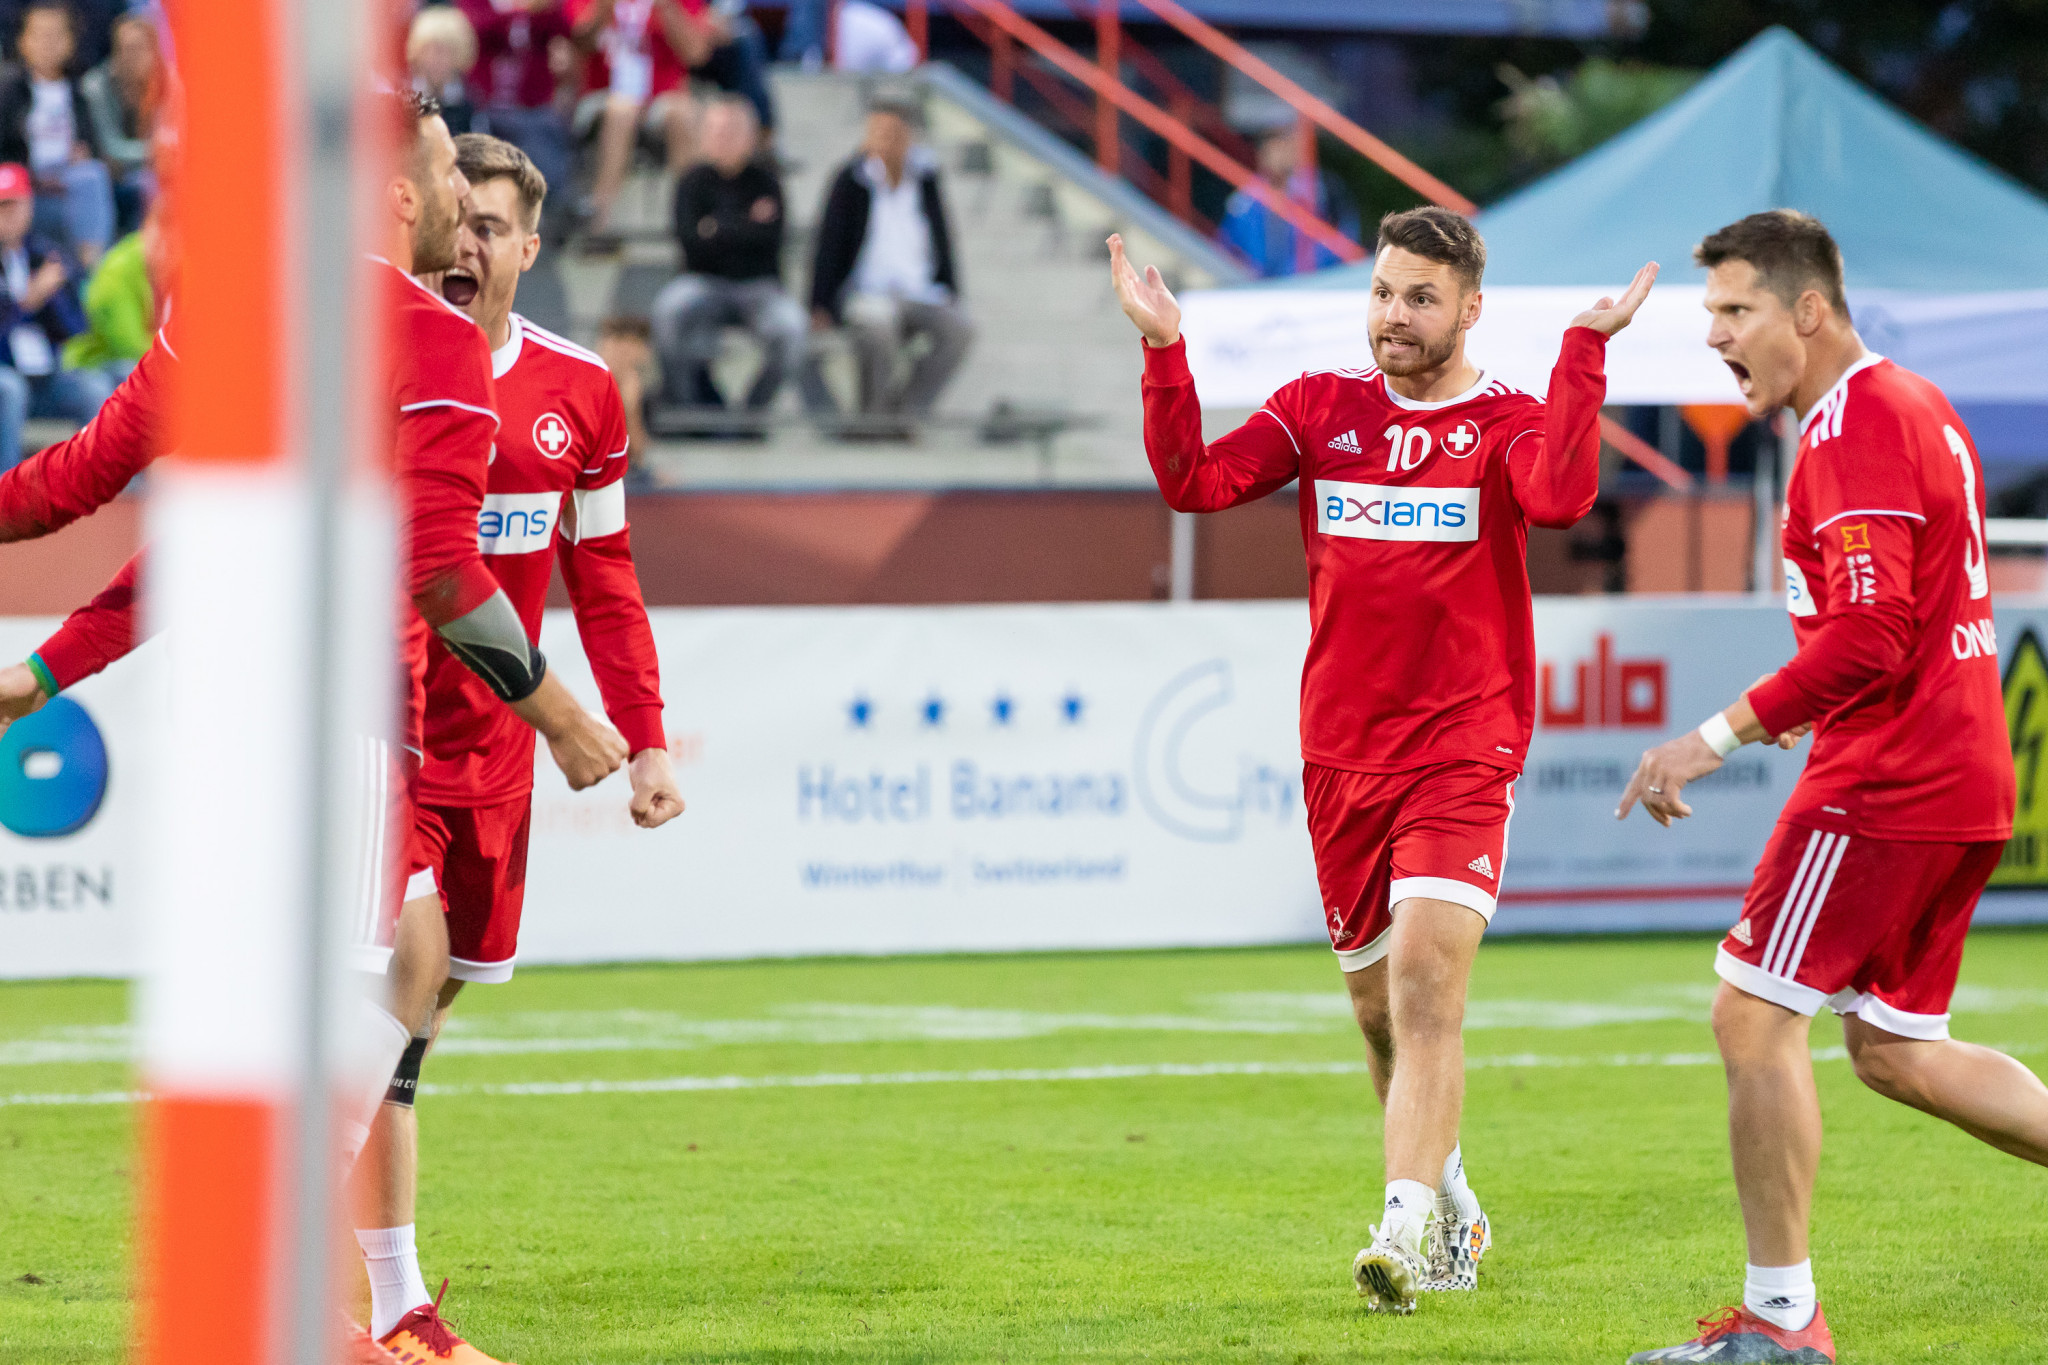 Hosts Switzerland one of four teams through to quarter-finals at IFA World Fistball Championship